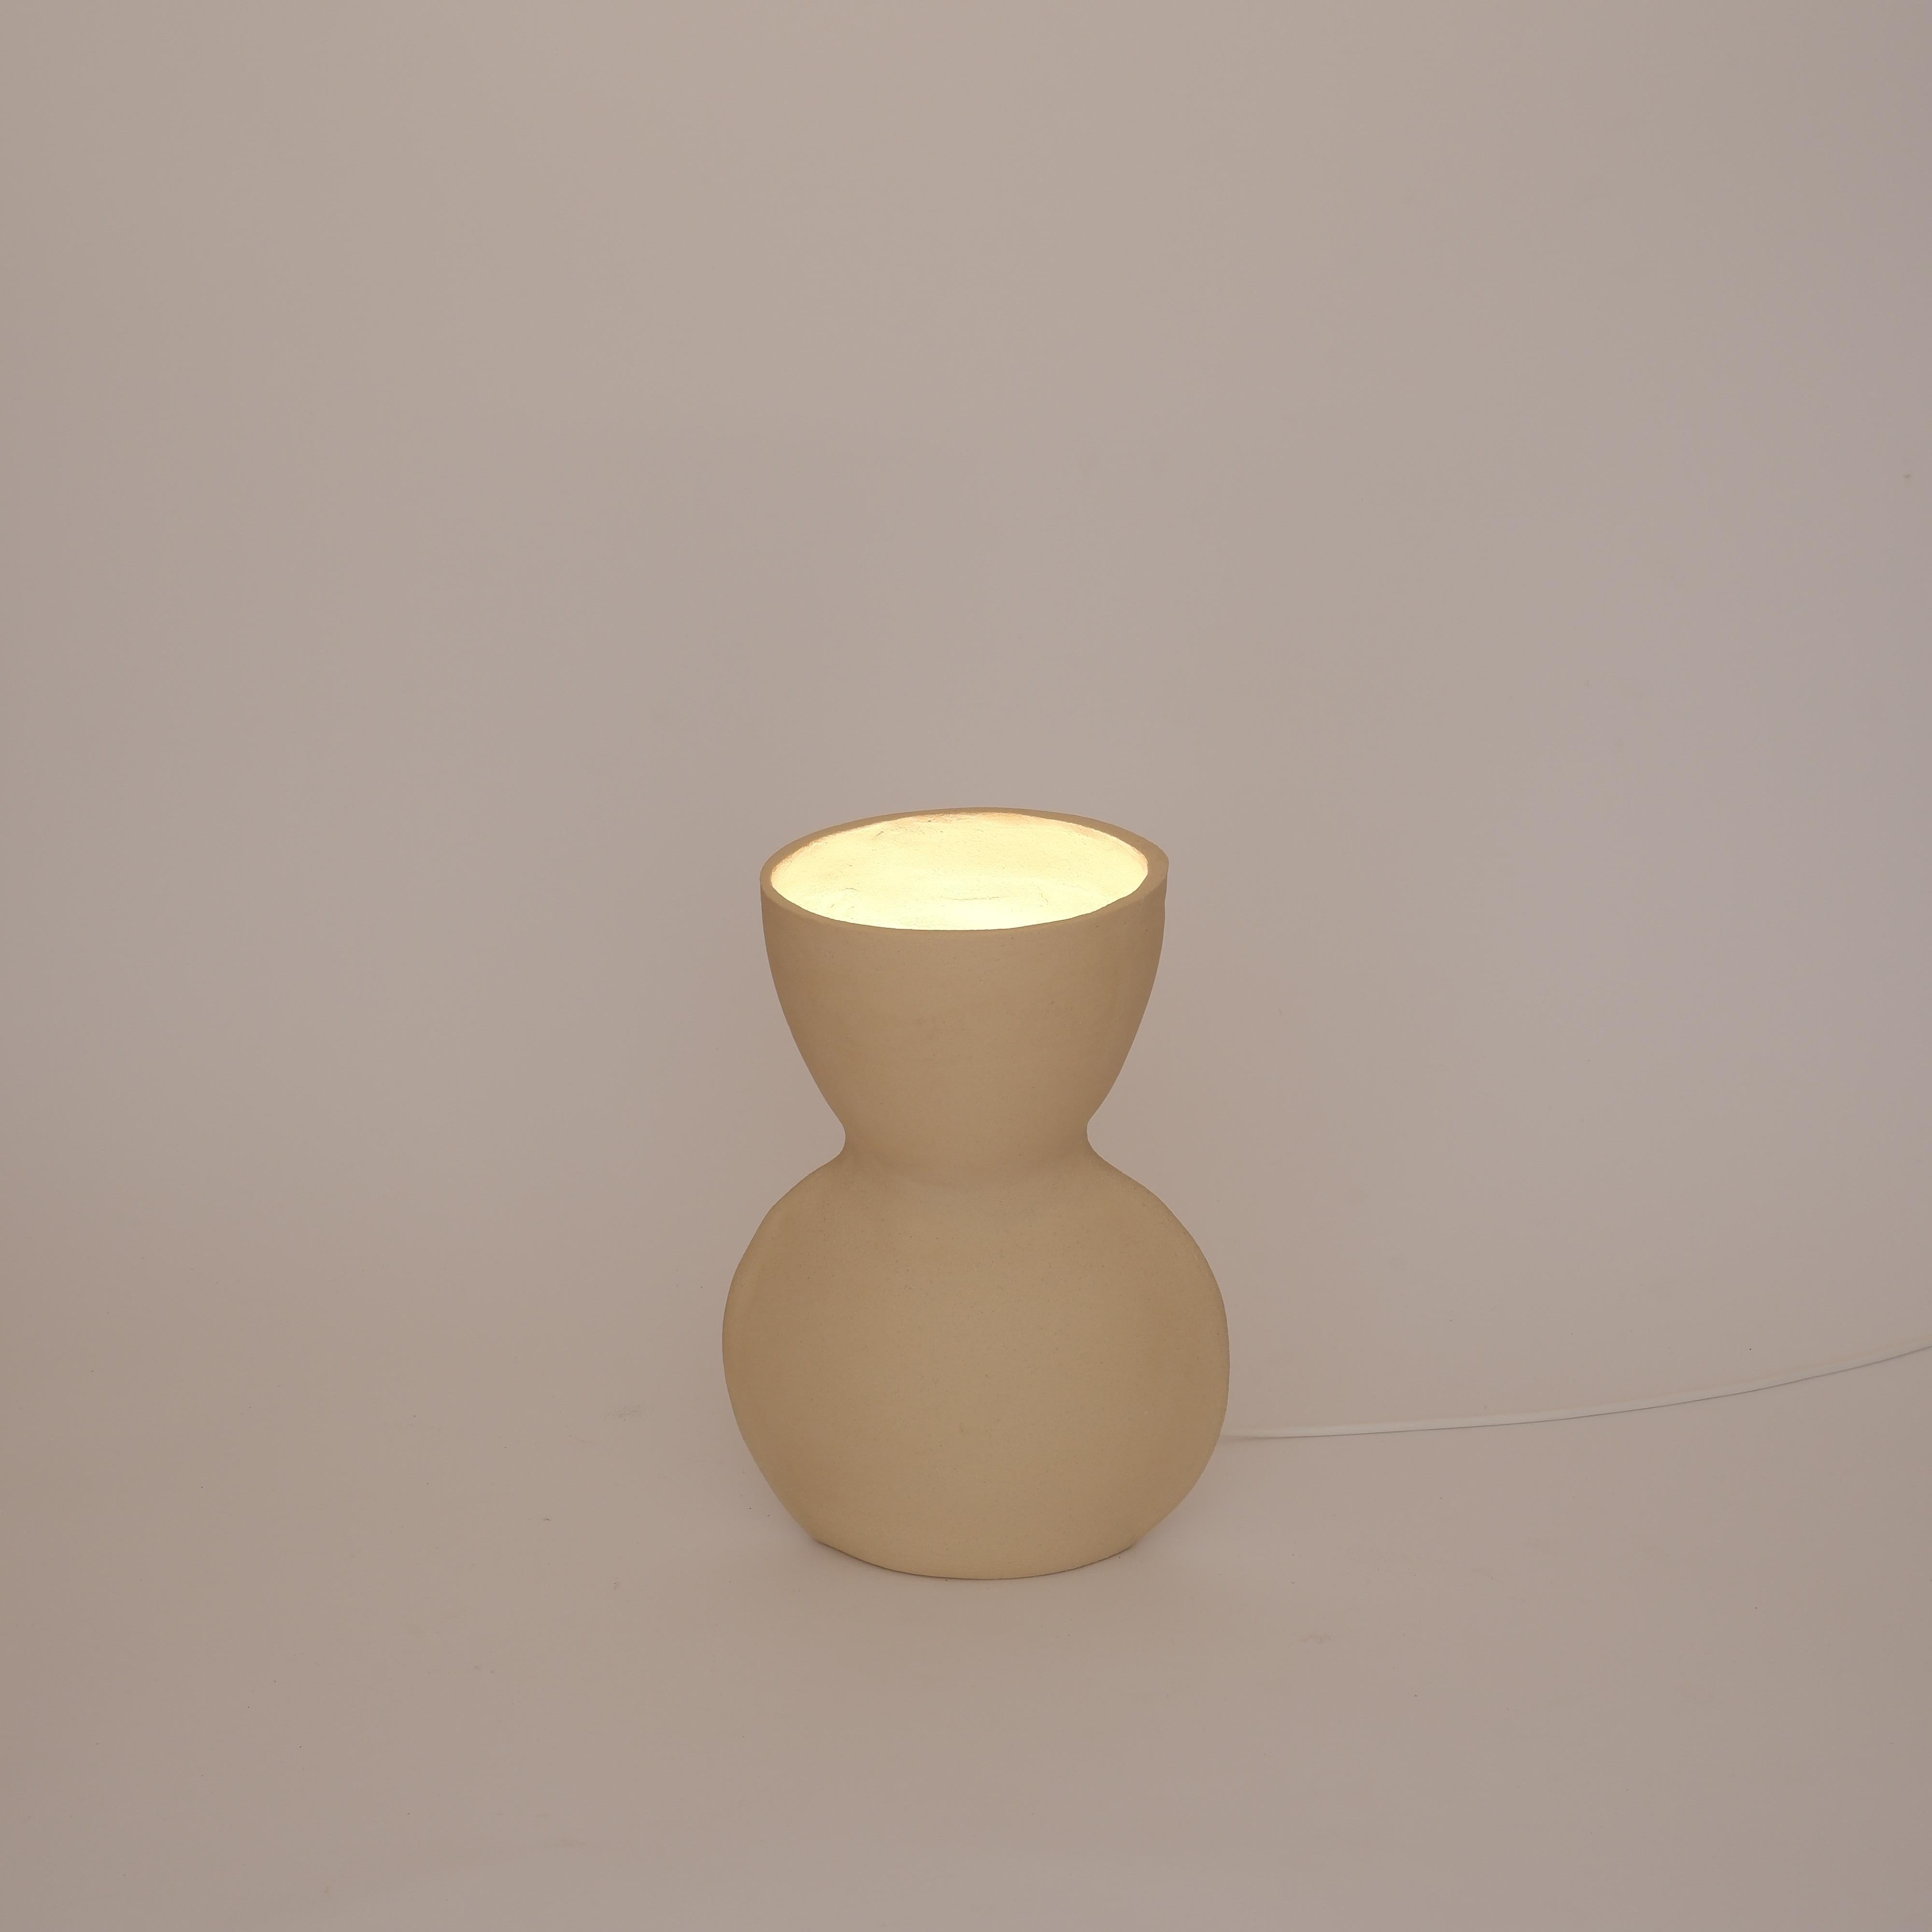 Unira Small White Lamp by Ia Kutateladze
One Of A Kind.
Dimensions: D 14 x W 18 x H 25 cm.
Materials: Clay.

Each piece is one of a kind, due to its free hand-building process. Different color variations available: raw black clay, raw white clay and